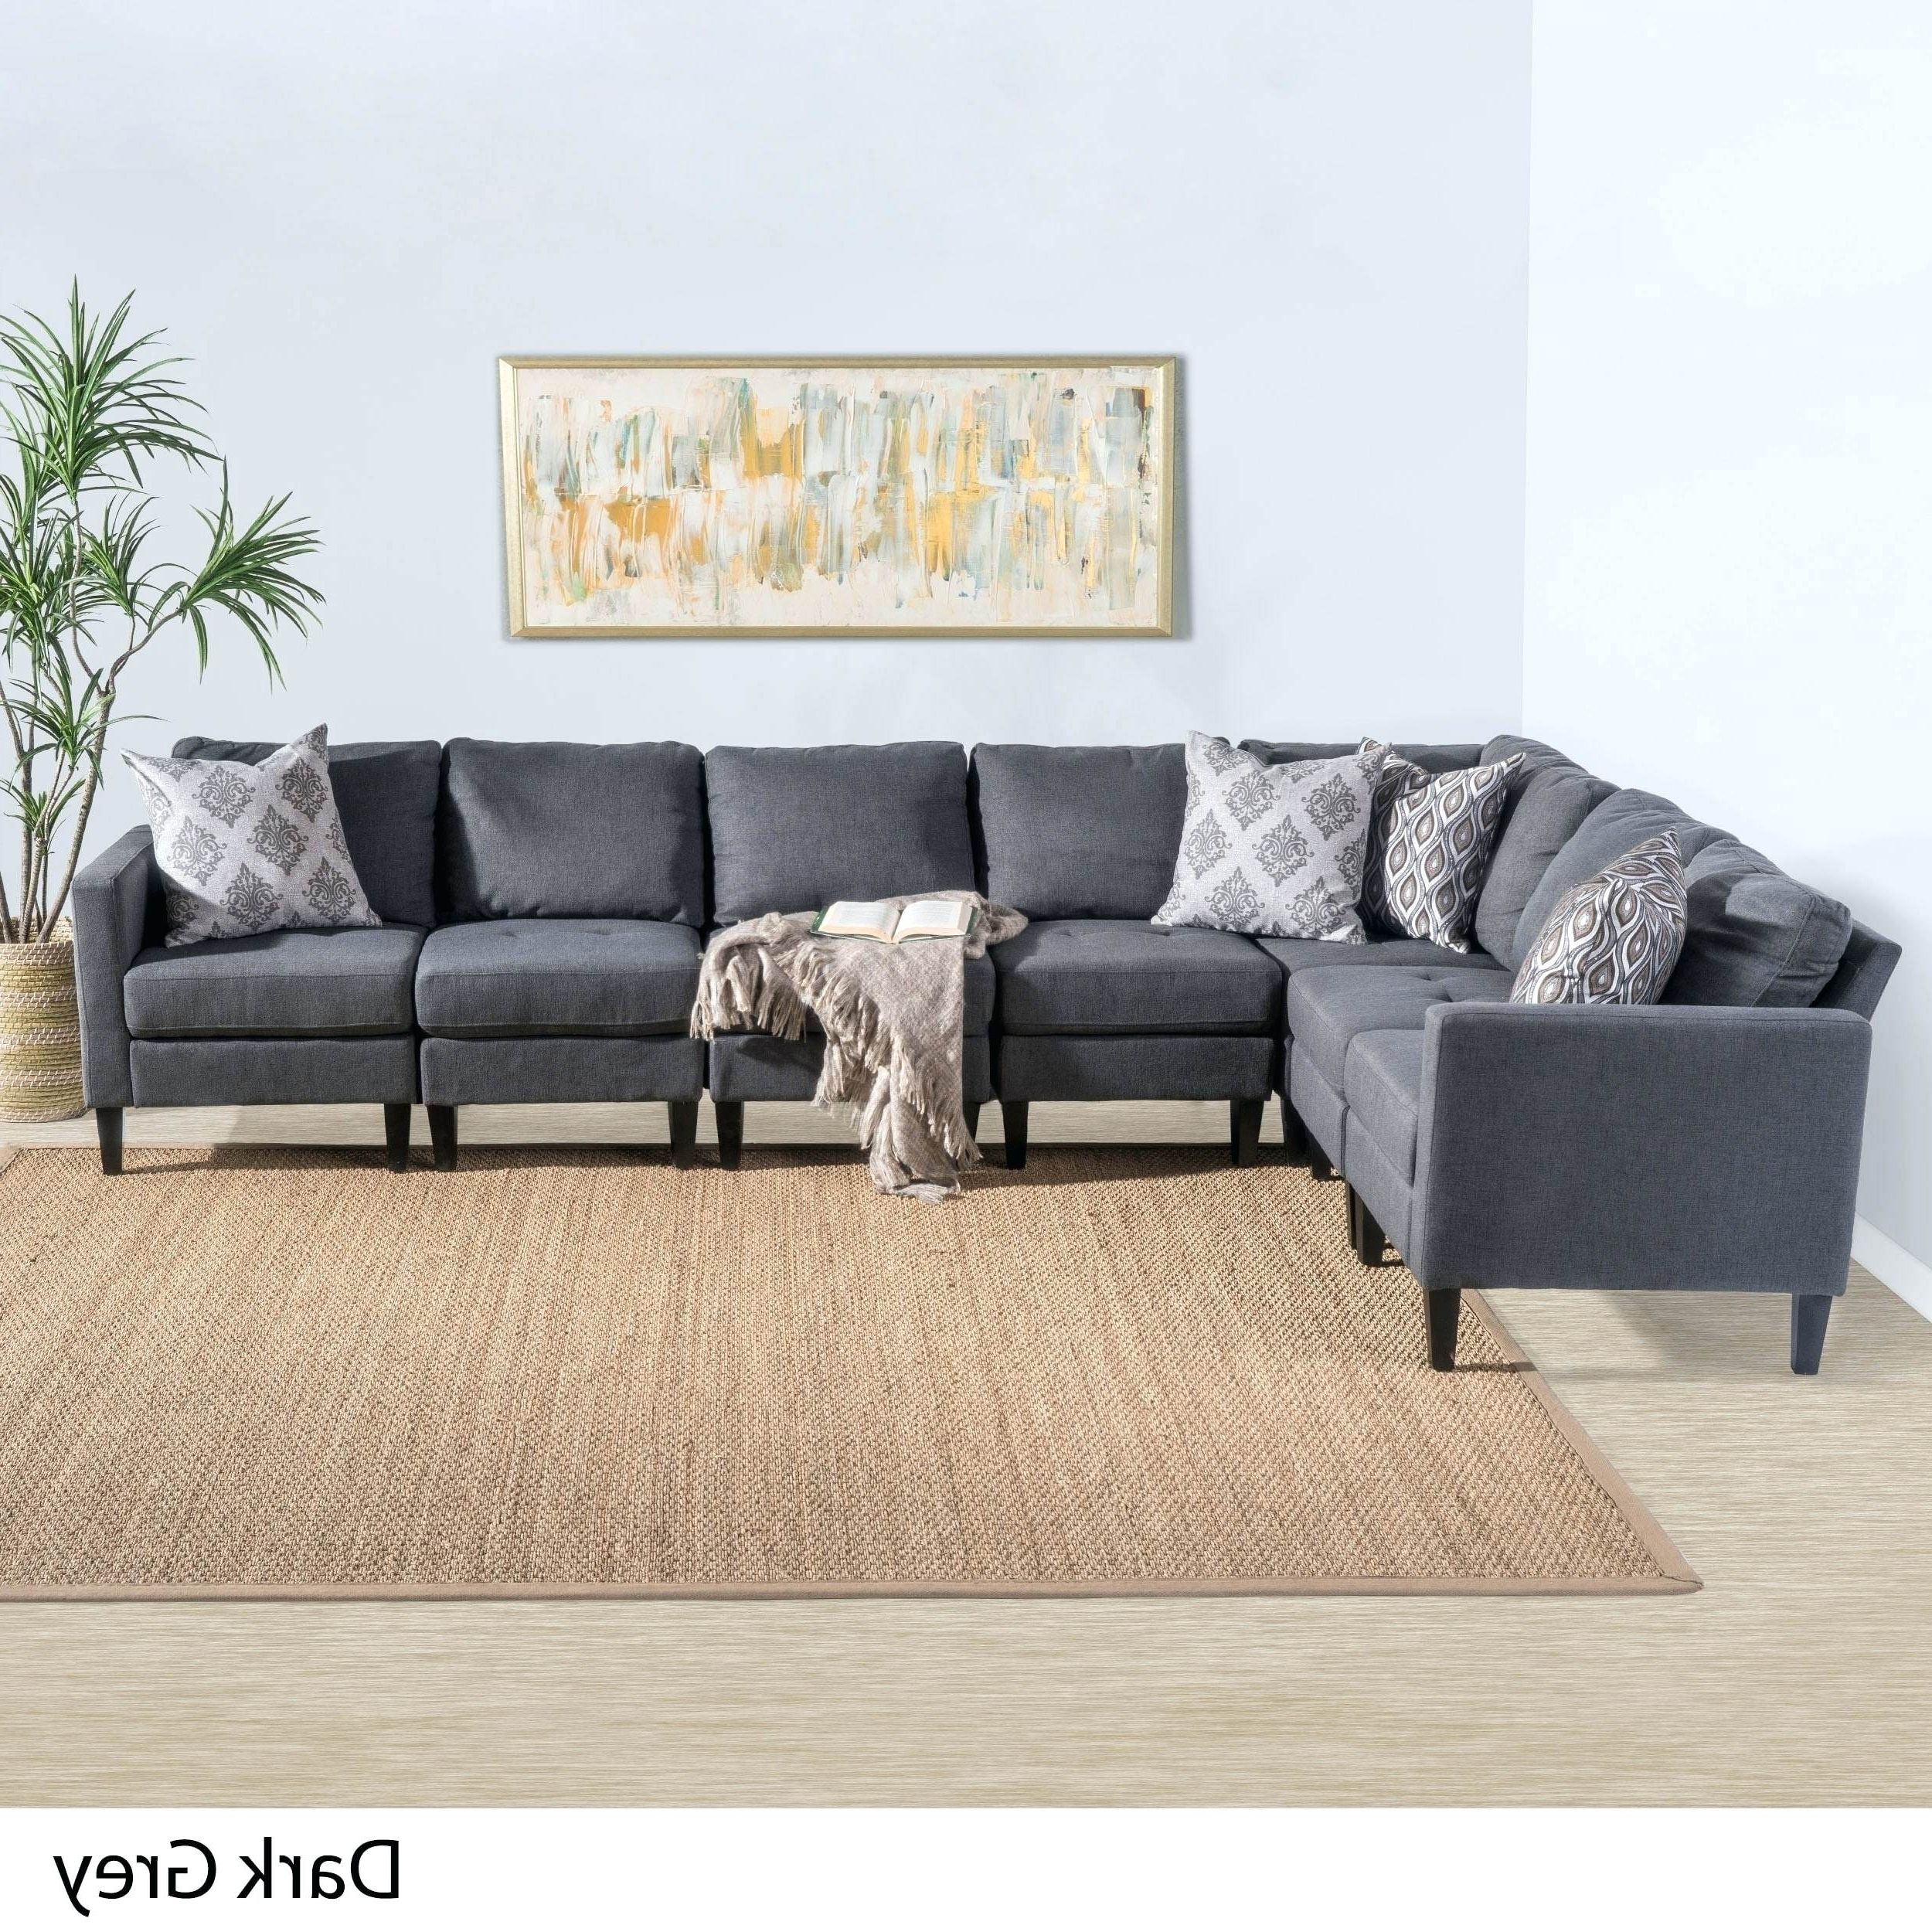 Big Lots Chaises With Popular Fabric Sectional Sofas With Recliners For Sale Chaise Small Spaces (Photo 2 of 15)